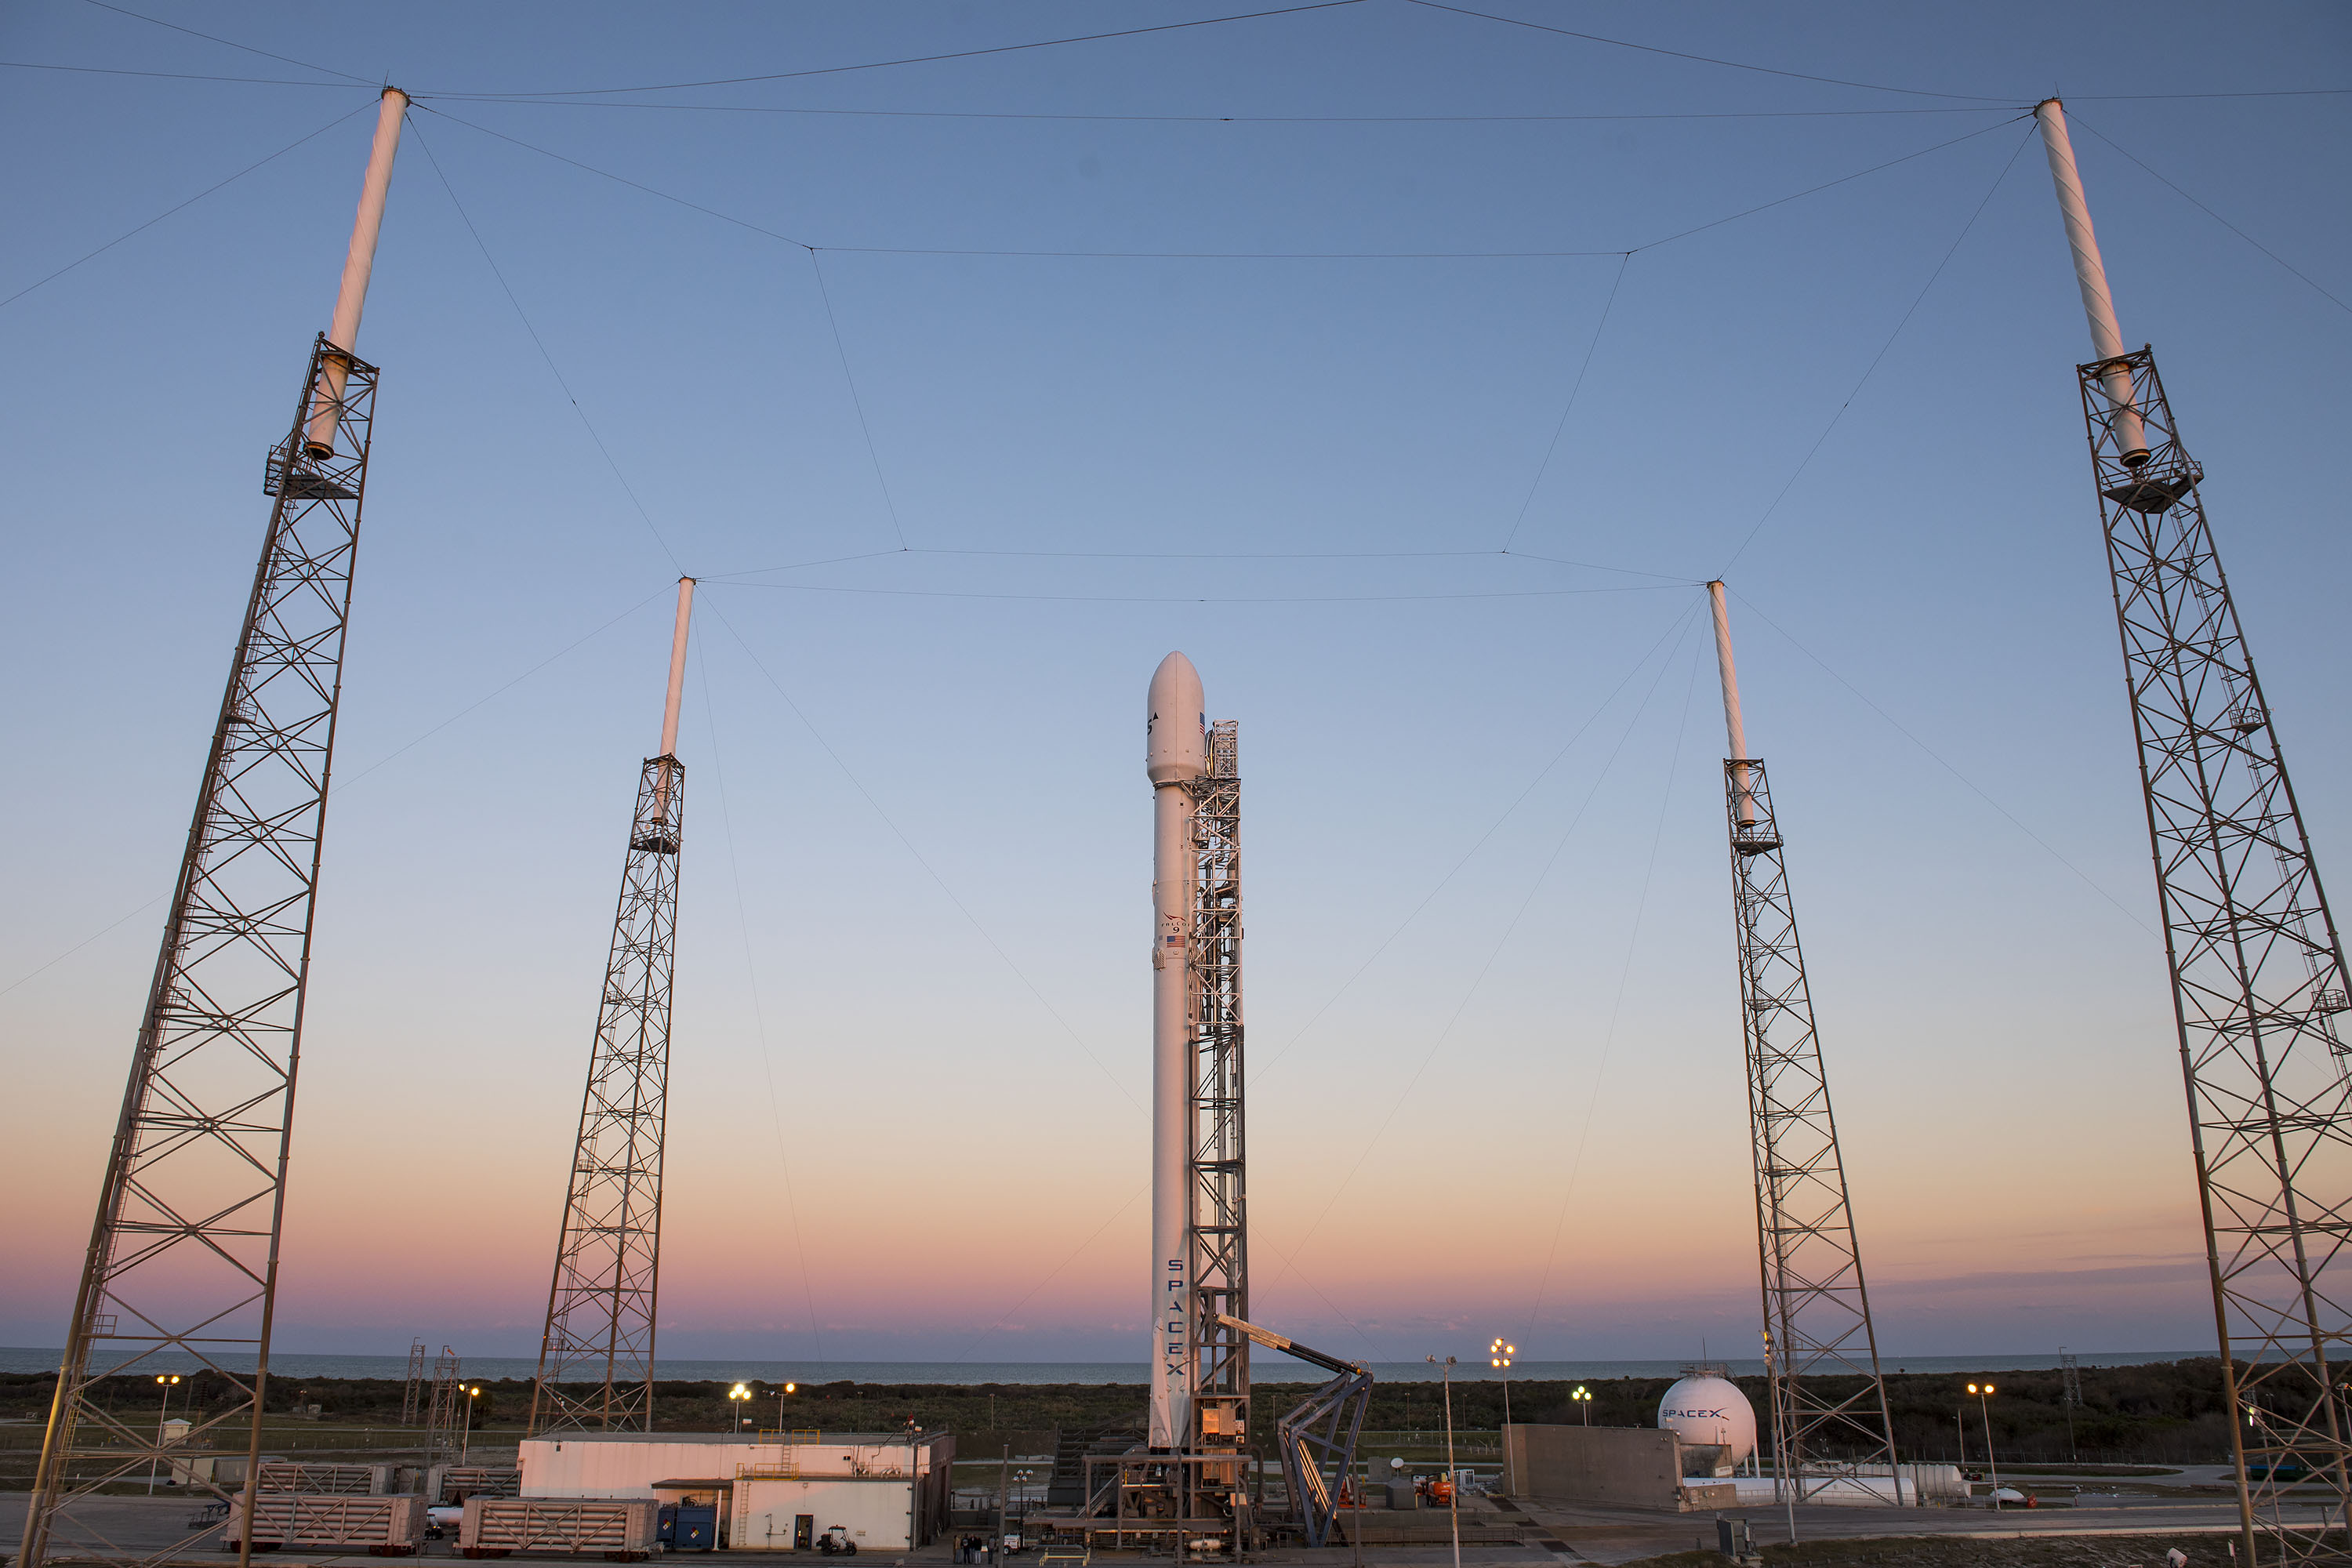 Fourth time's the charm for SpaceX's satellite launch; did rocket landing work?